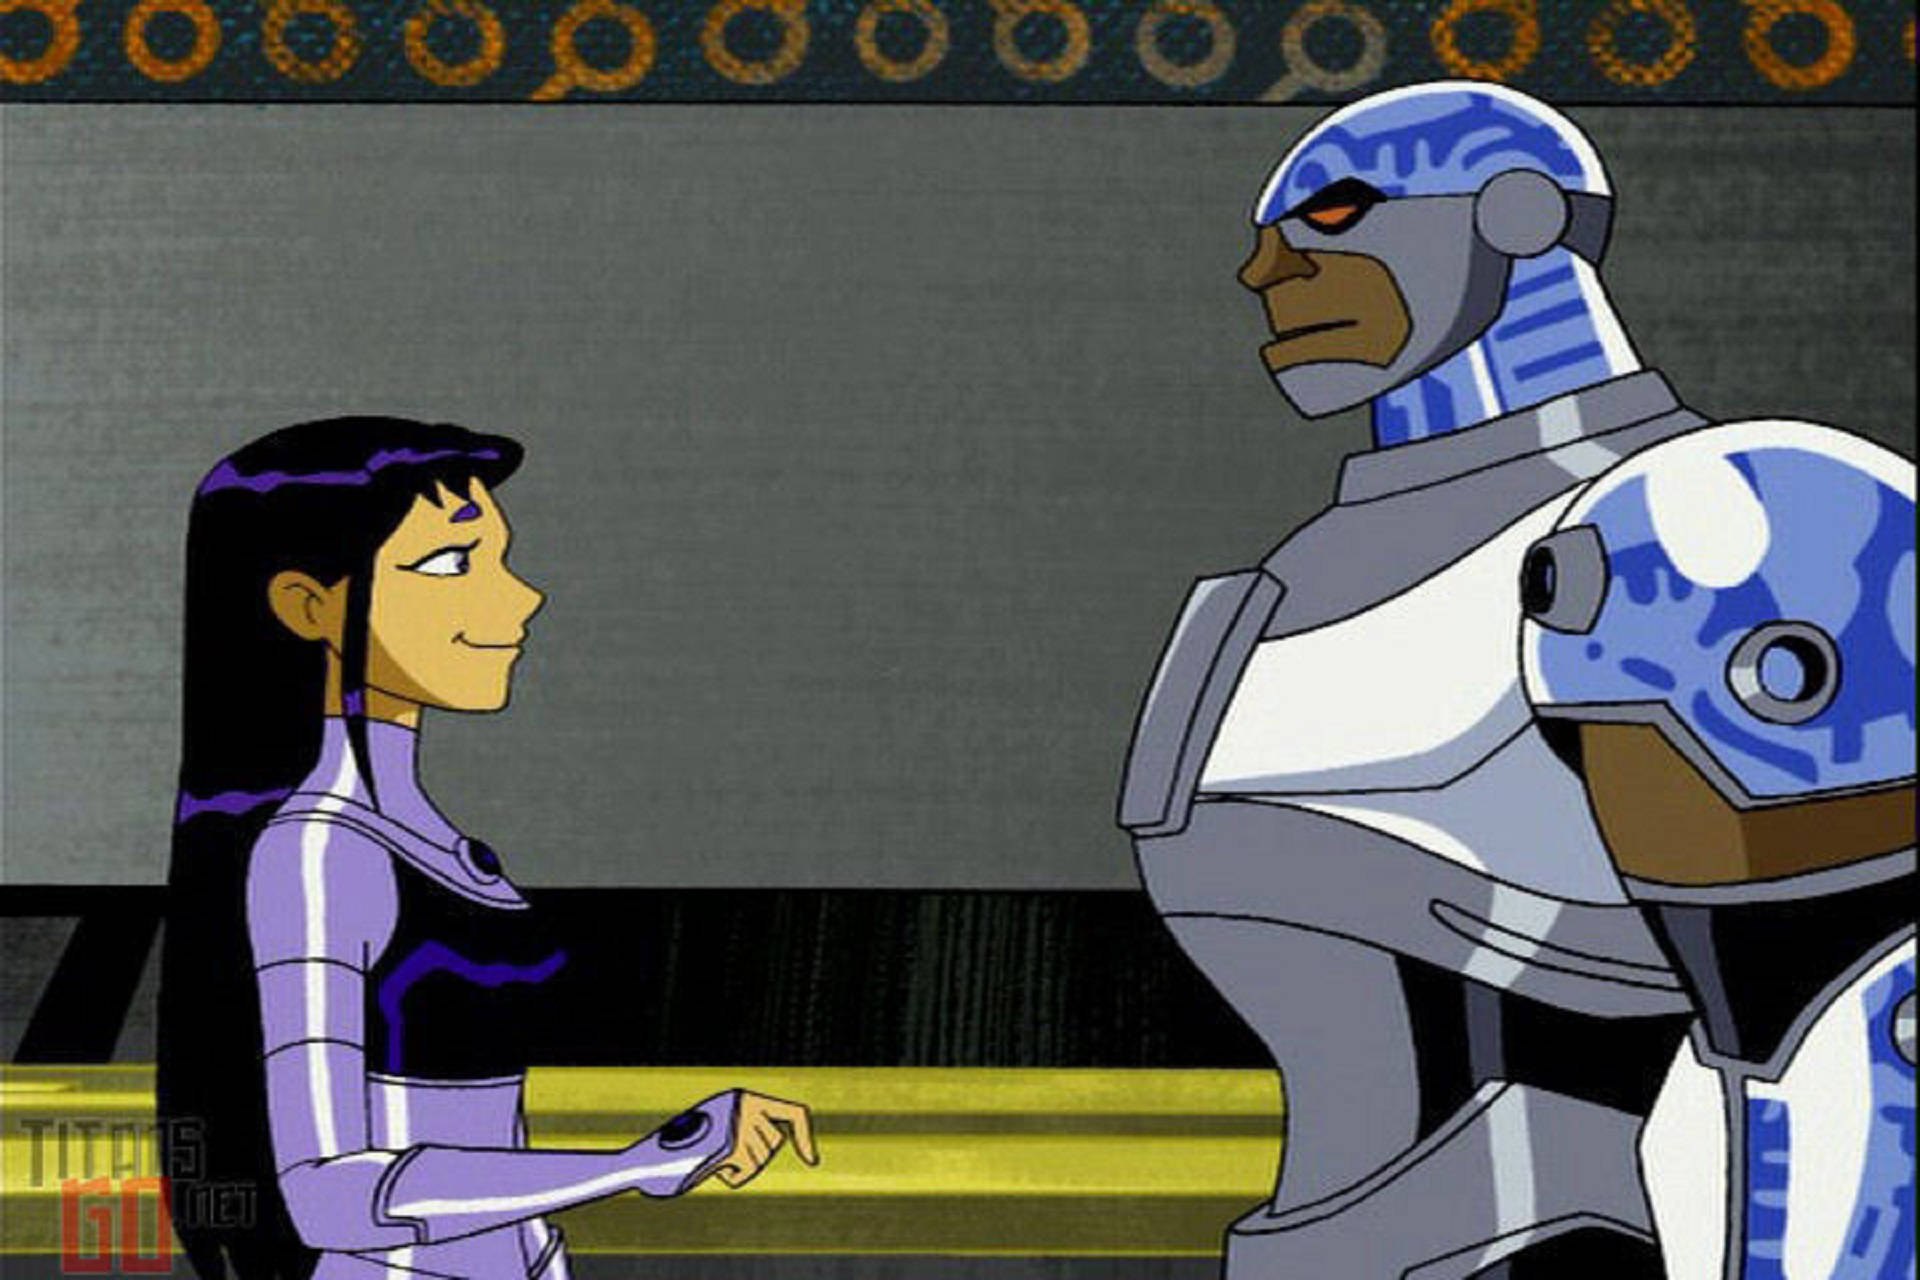 Blackfire And Cyborg - The Dynamic Duo Background